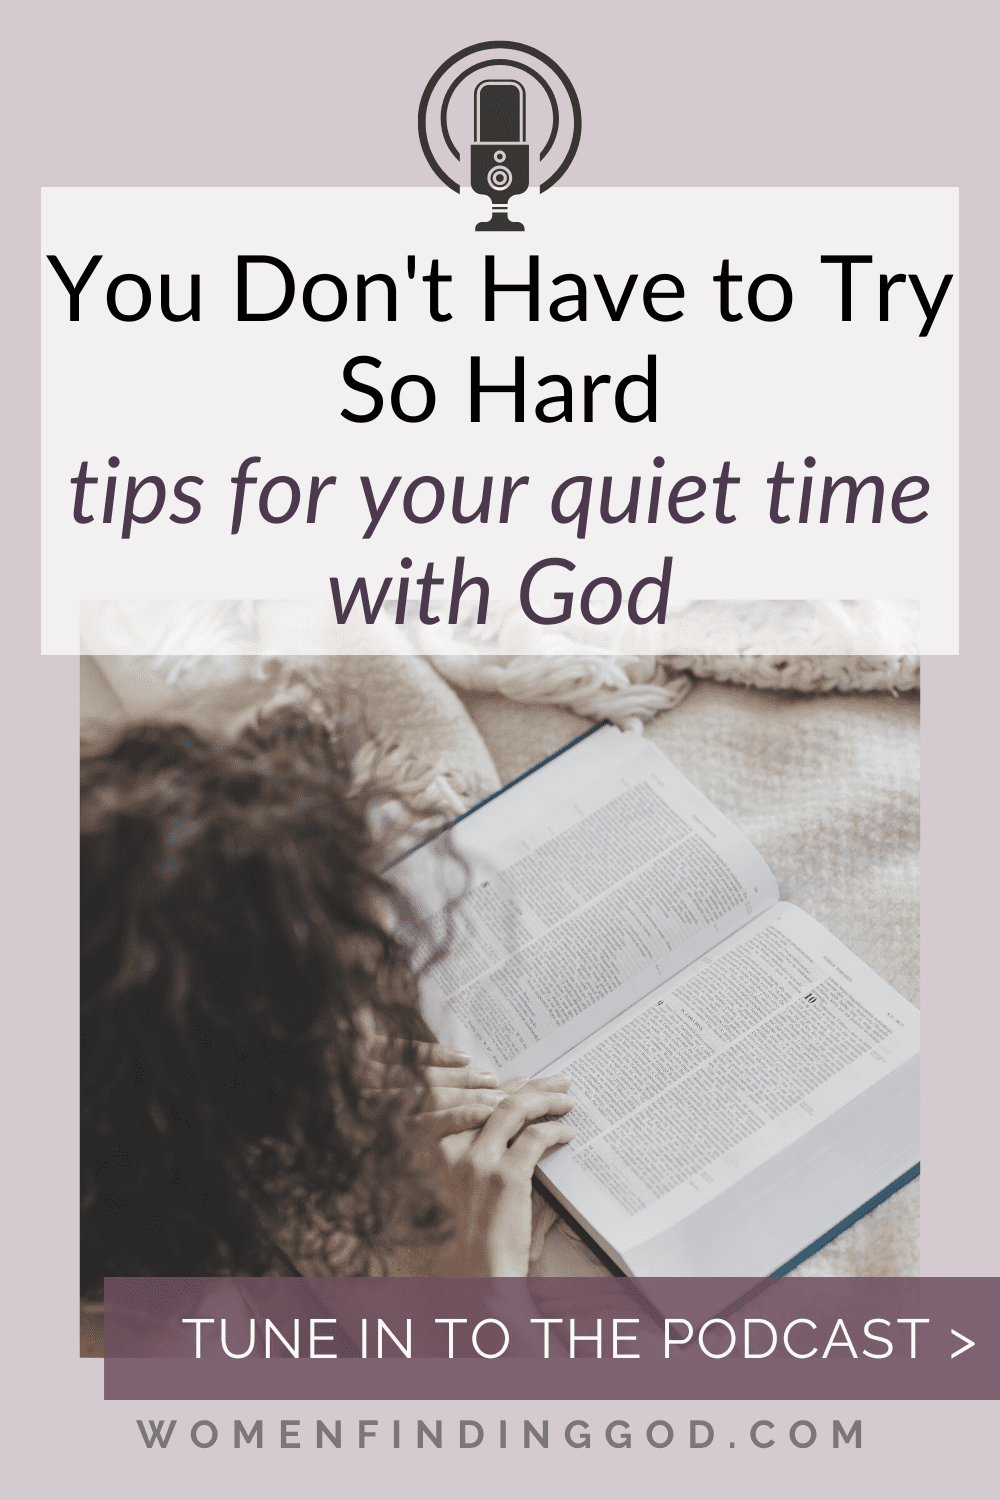 Are you ready to finally make progress on your spiritual growth? Learn the three things you need in order to have a successful quiet time with God each day. Plus, tips about how to deal with overwhelm, decision fatigue, and feeling like a failure. You don't want to miss this podcast episode on micro-wins and your faith walk! via @womenfindinggod